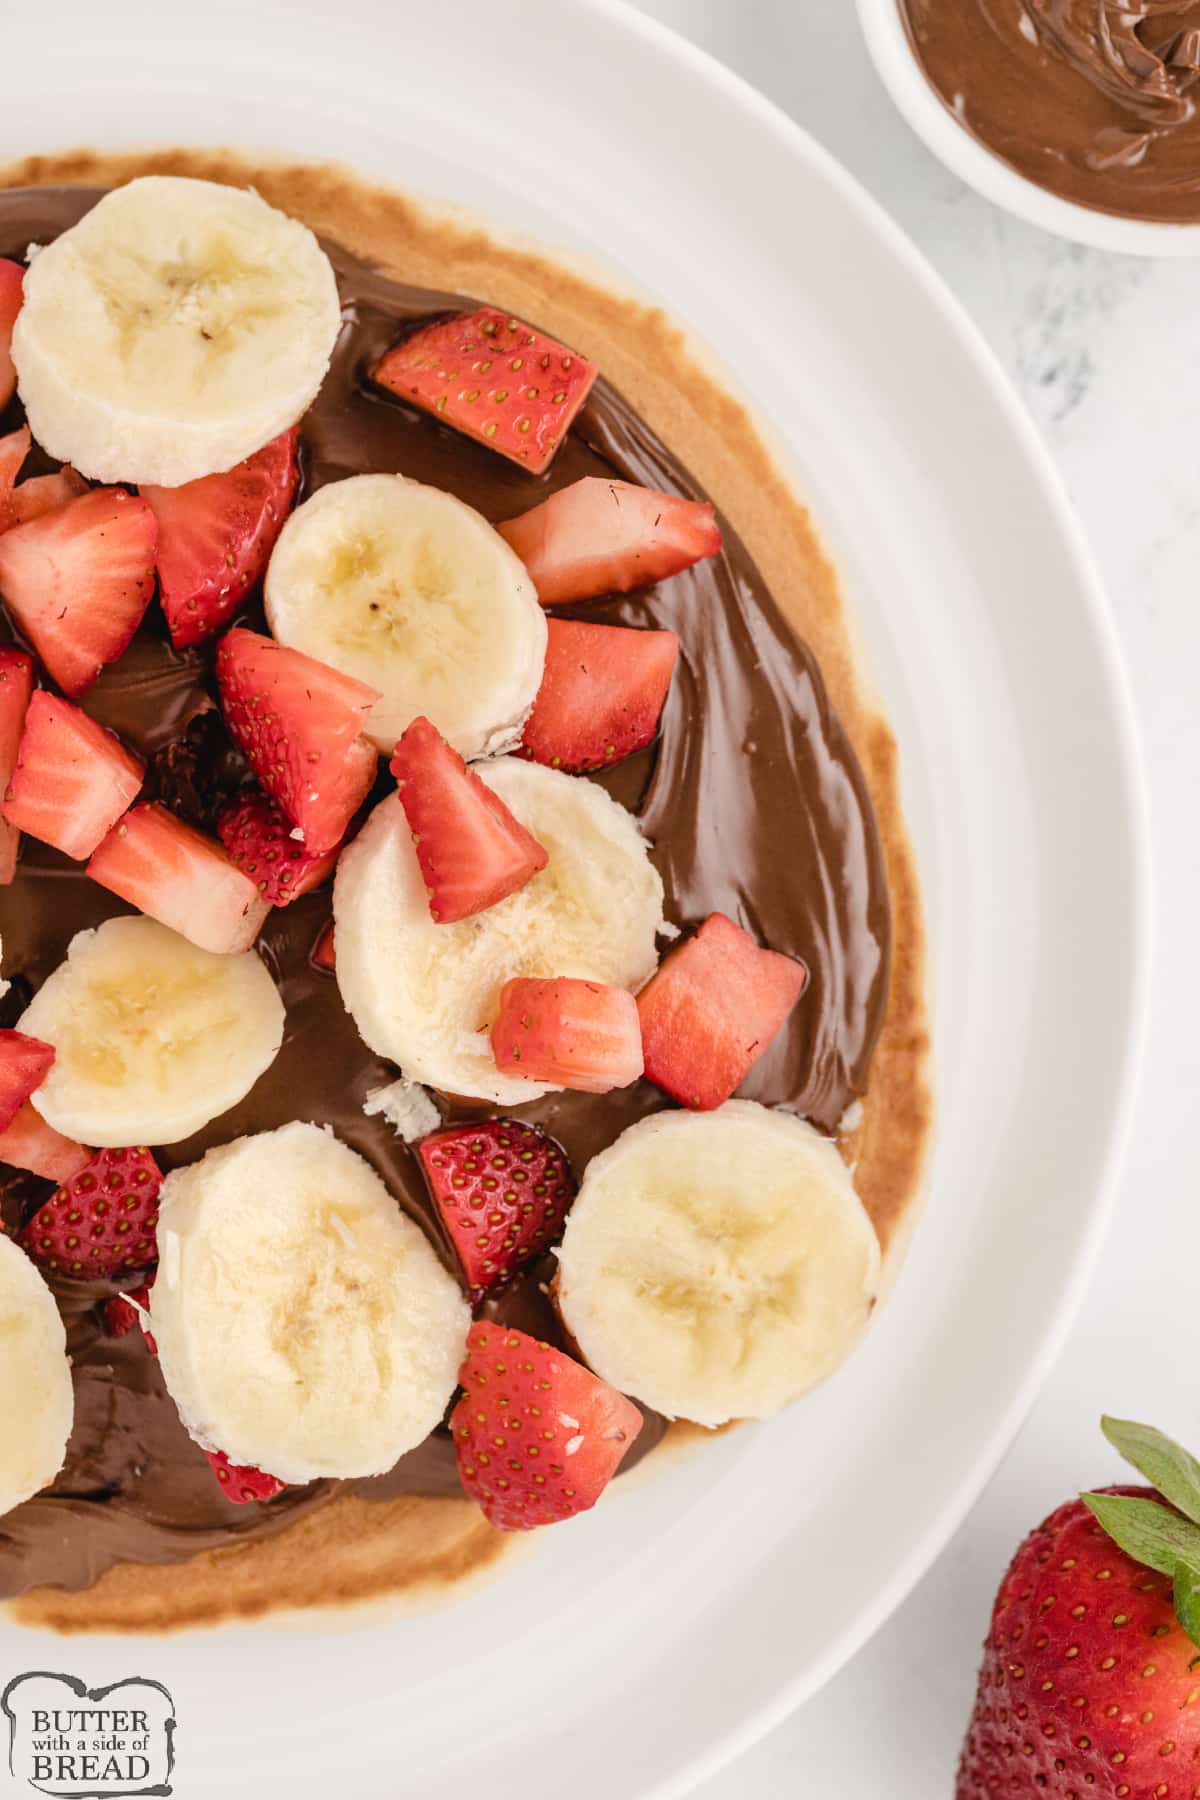 Nutella breakfast pizza recipe with strawberries and bananas